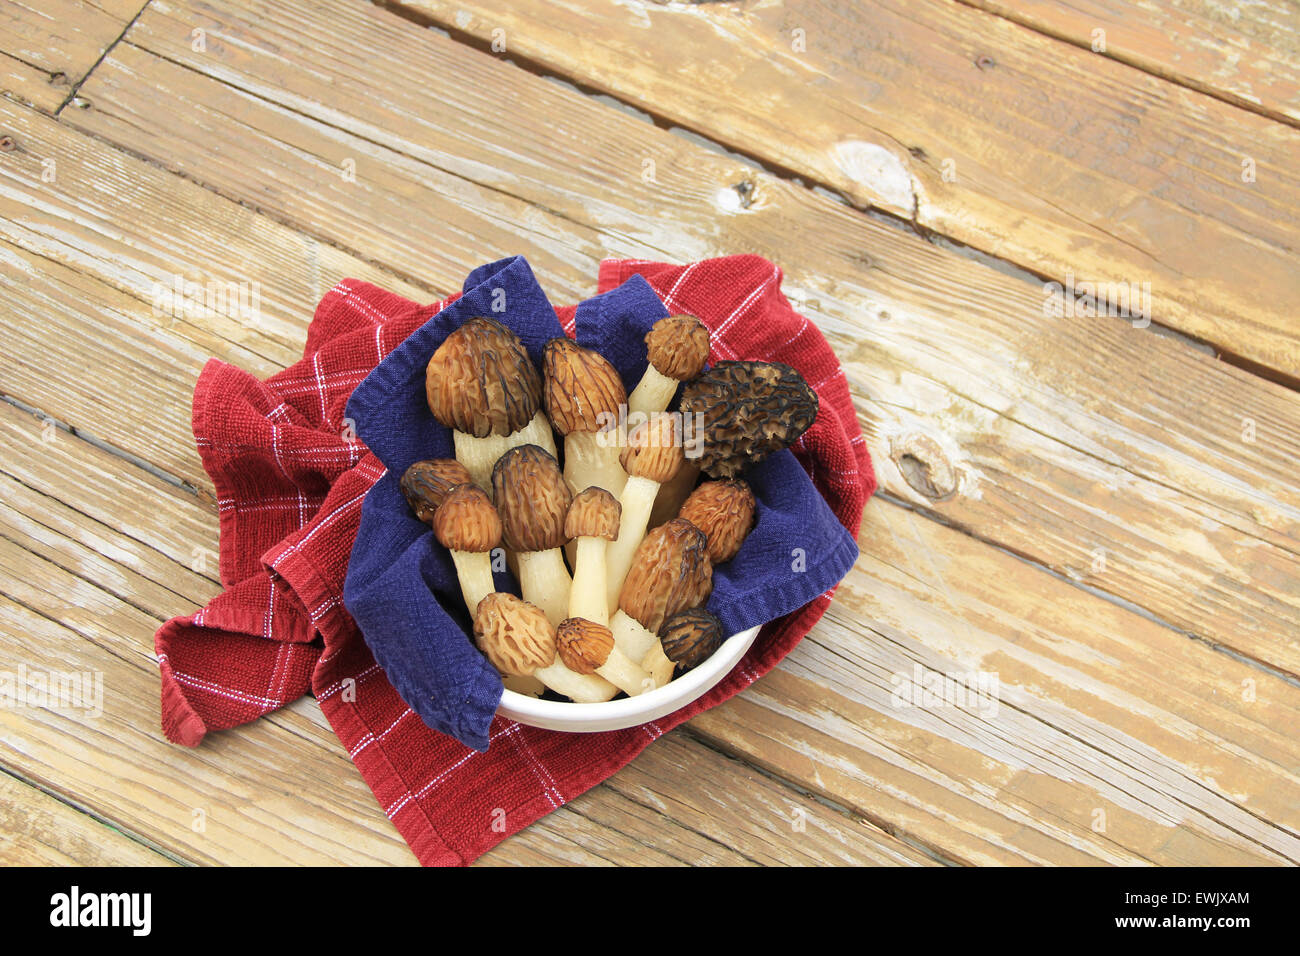 Wild Morel Mushrooms in a Crock with Towels Stock Photo